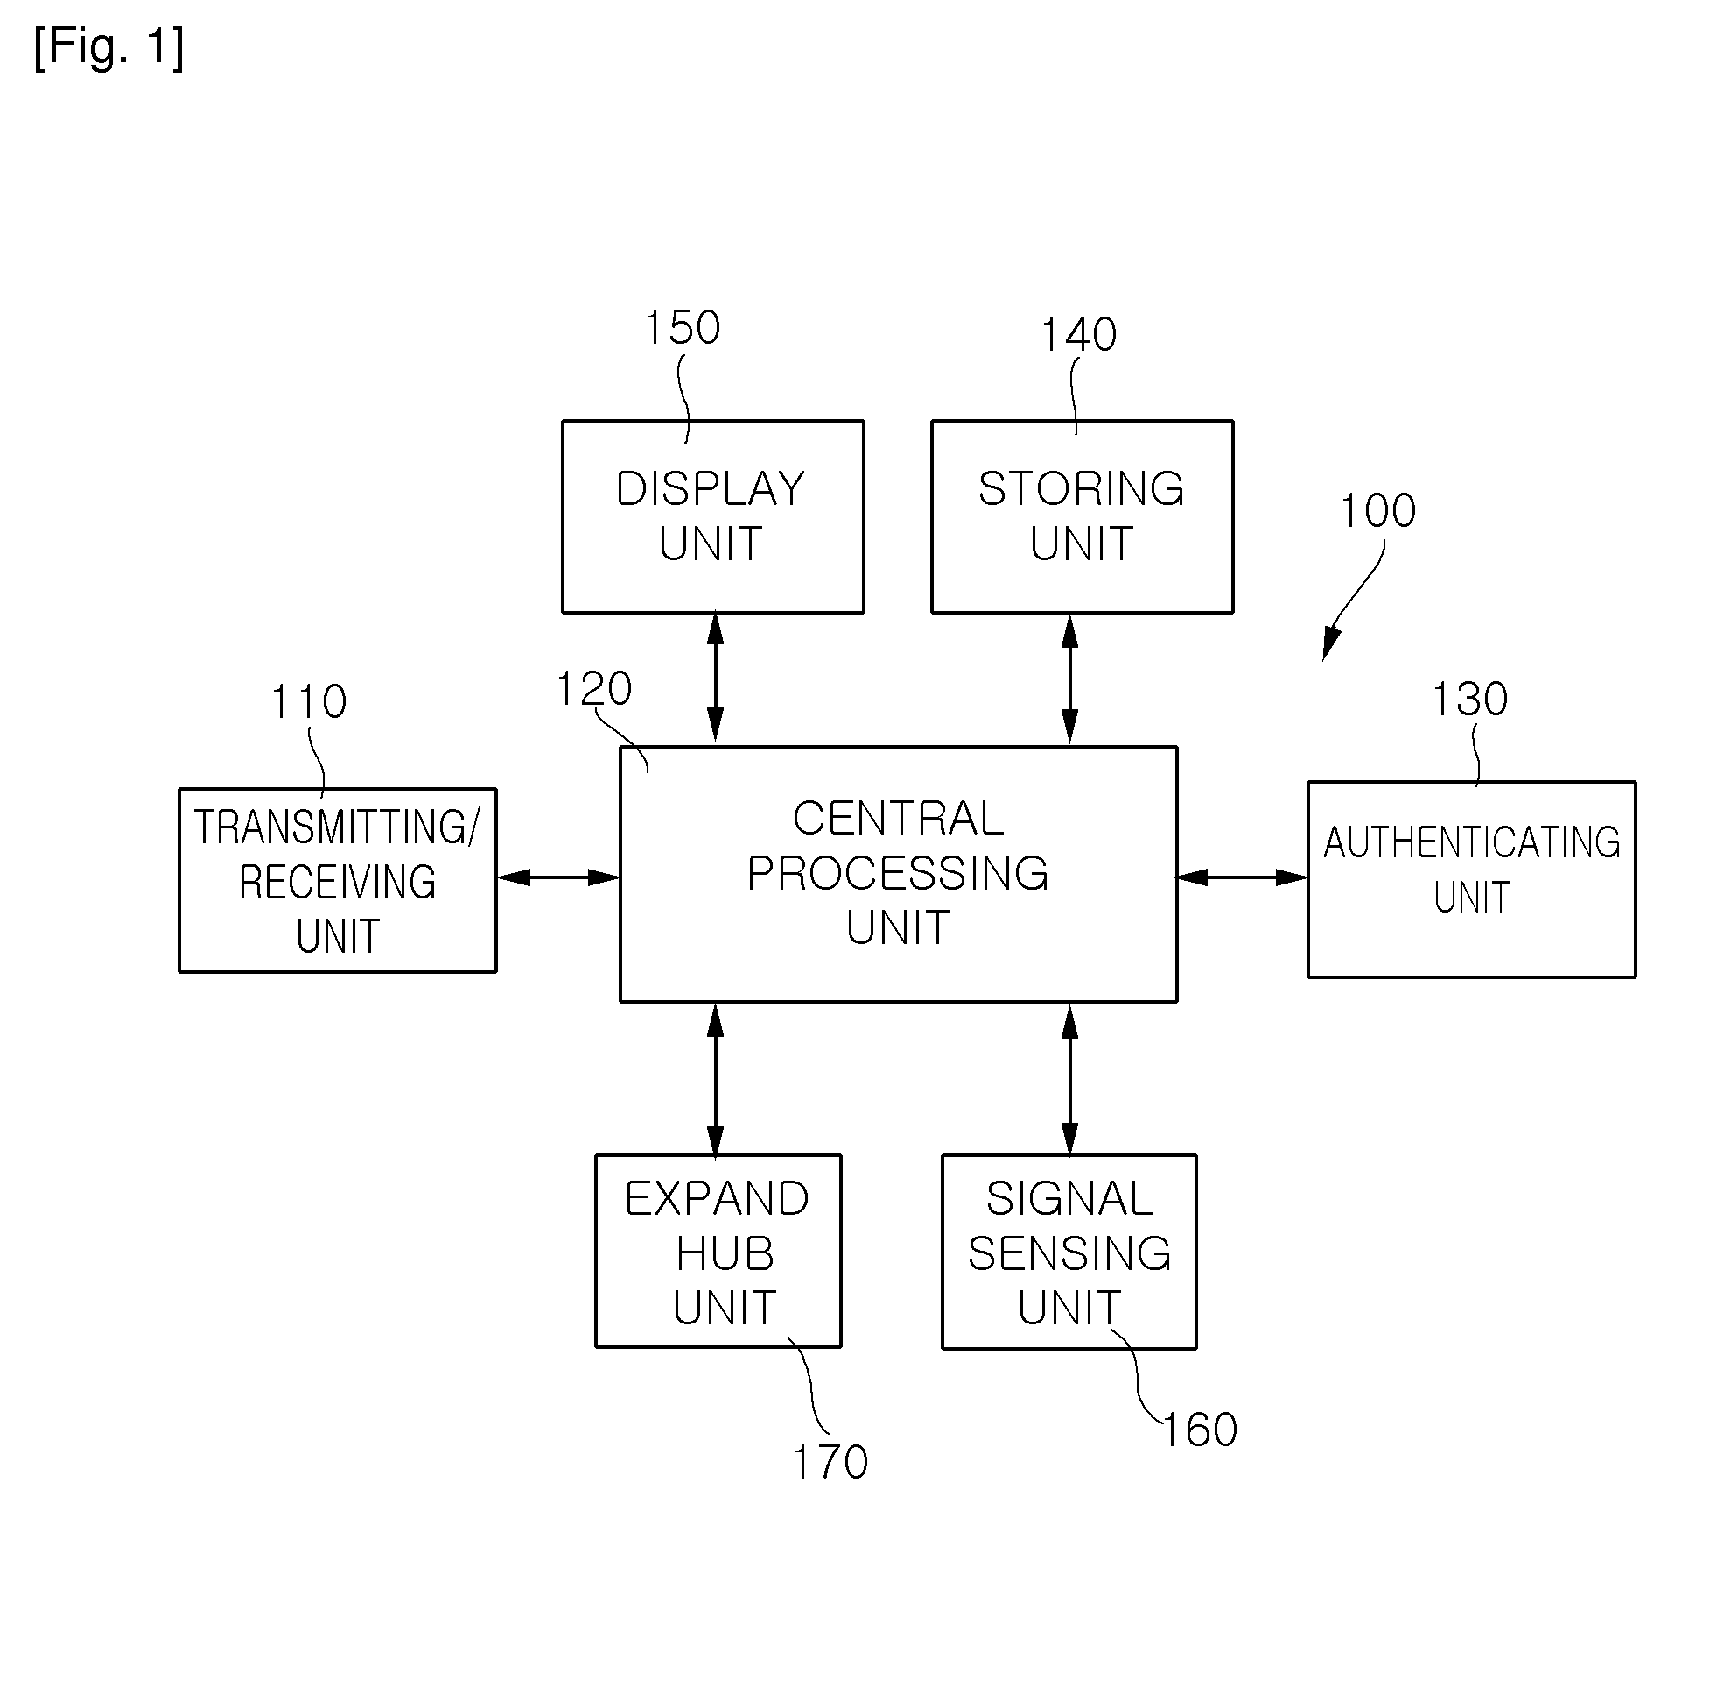 Wearable computer system and method controlling information/service in wearable computer system